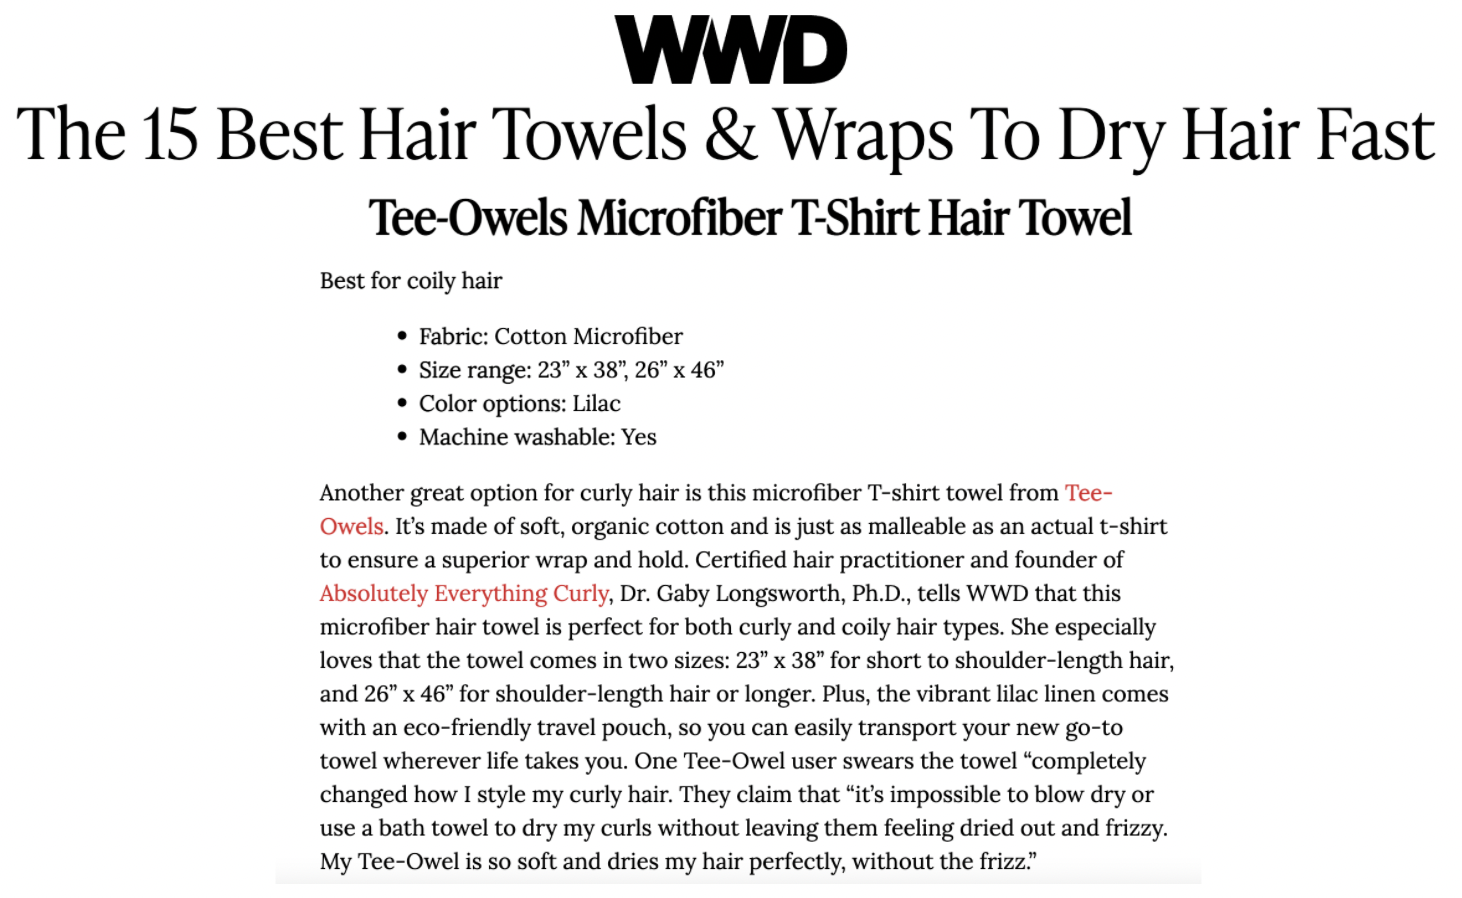 WWD 15 best hair towels and wraps